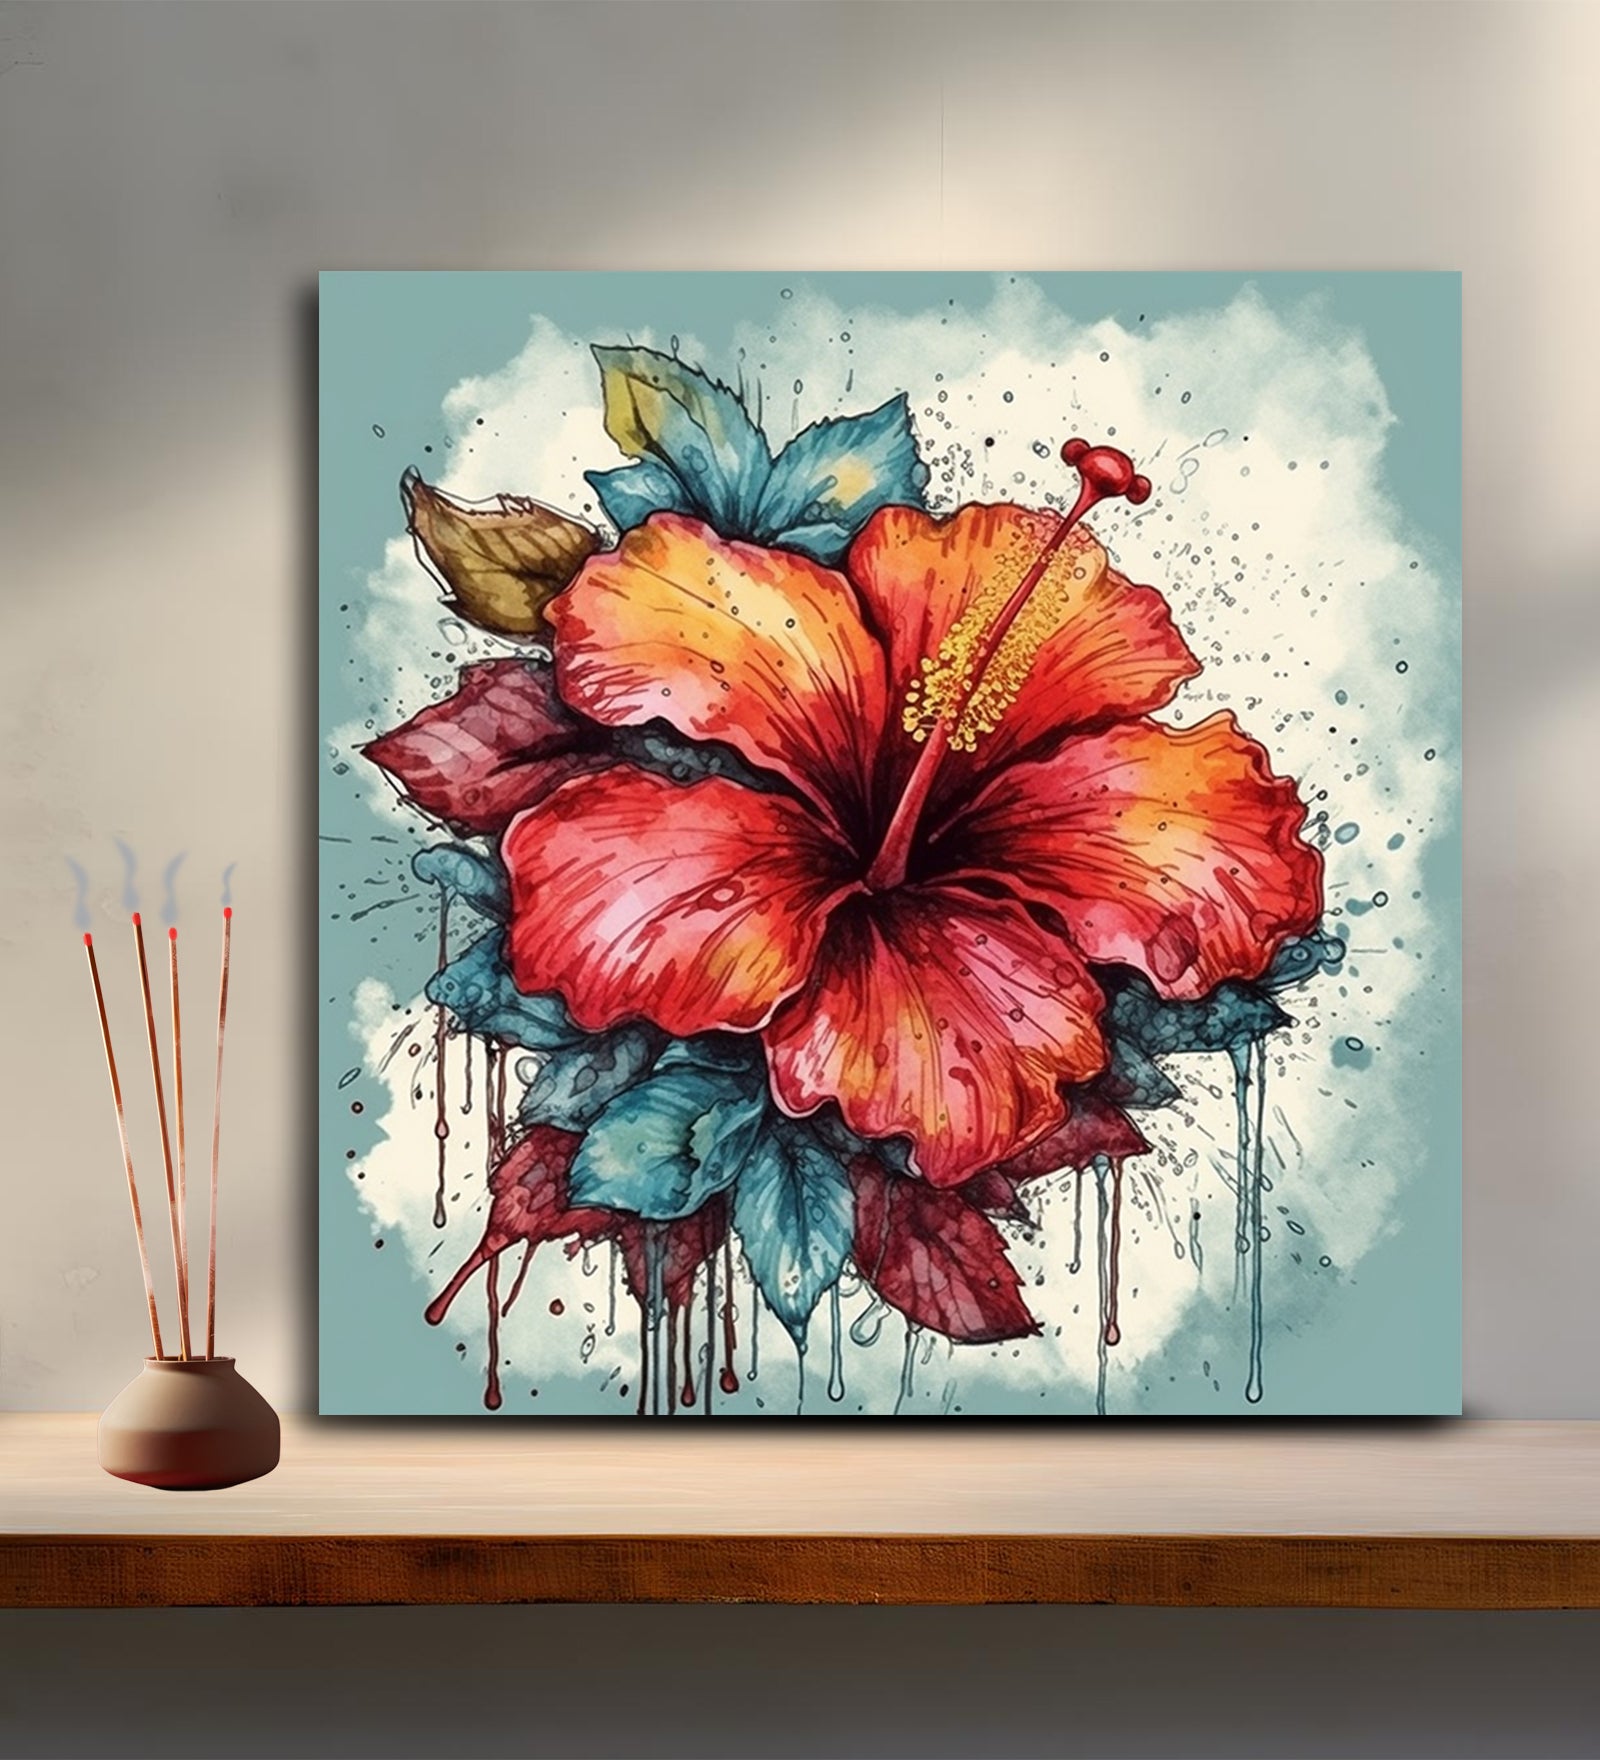 The Life Cycle of the Hibiscus Captured in a Stunning Canvas